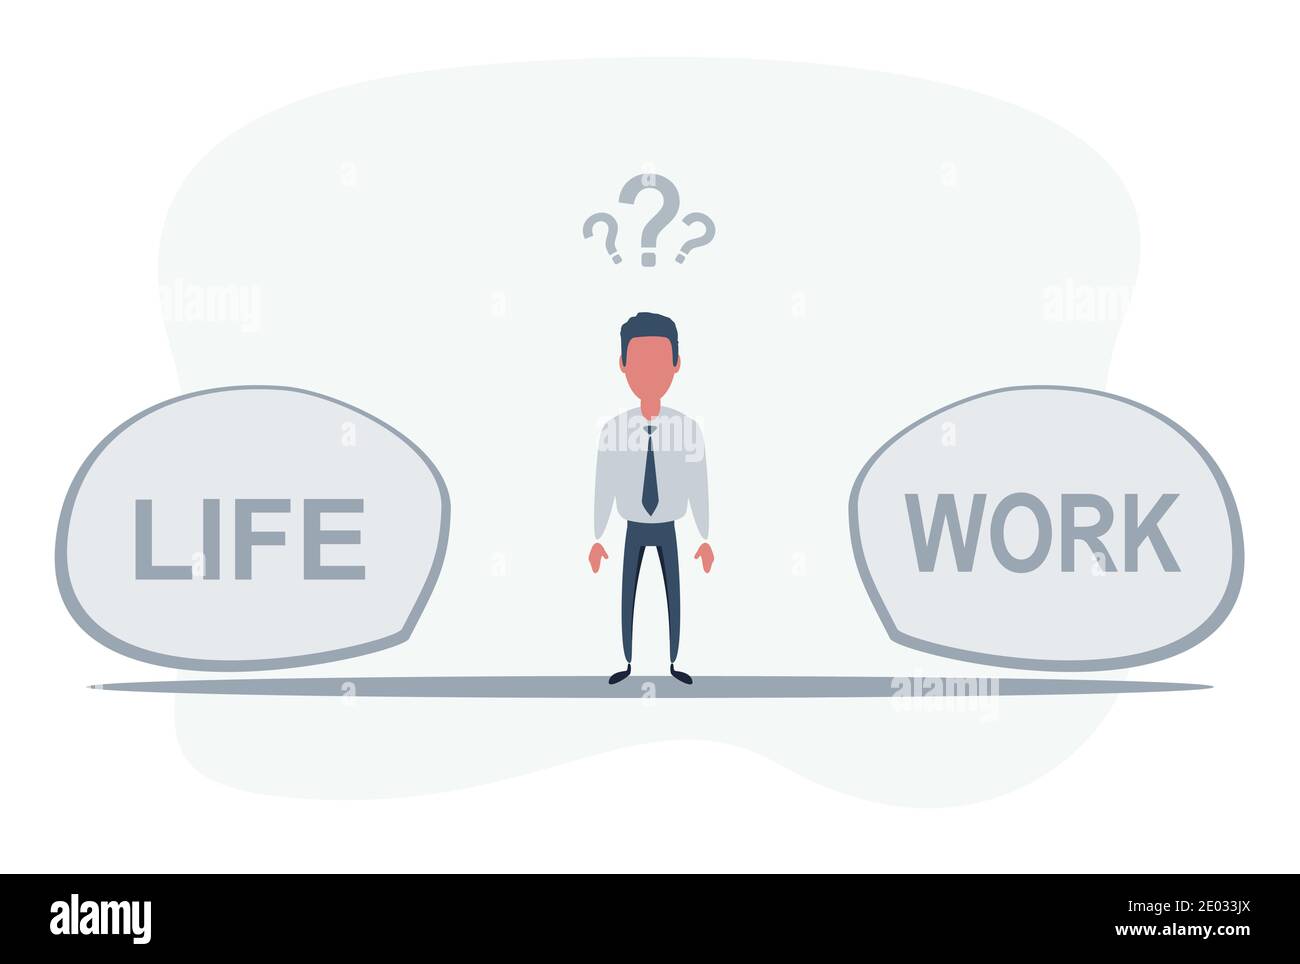 Man Standing in the middle between life and work. Work and Life balance concept. Stock Vector